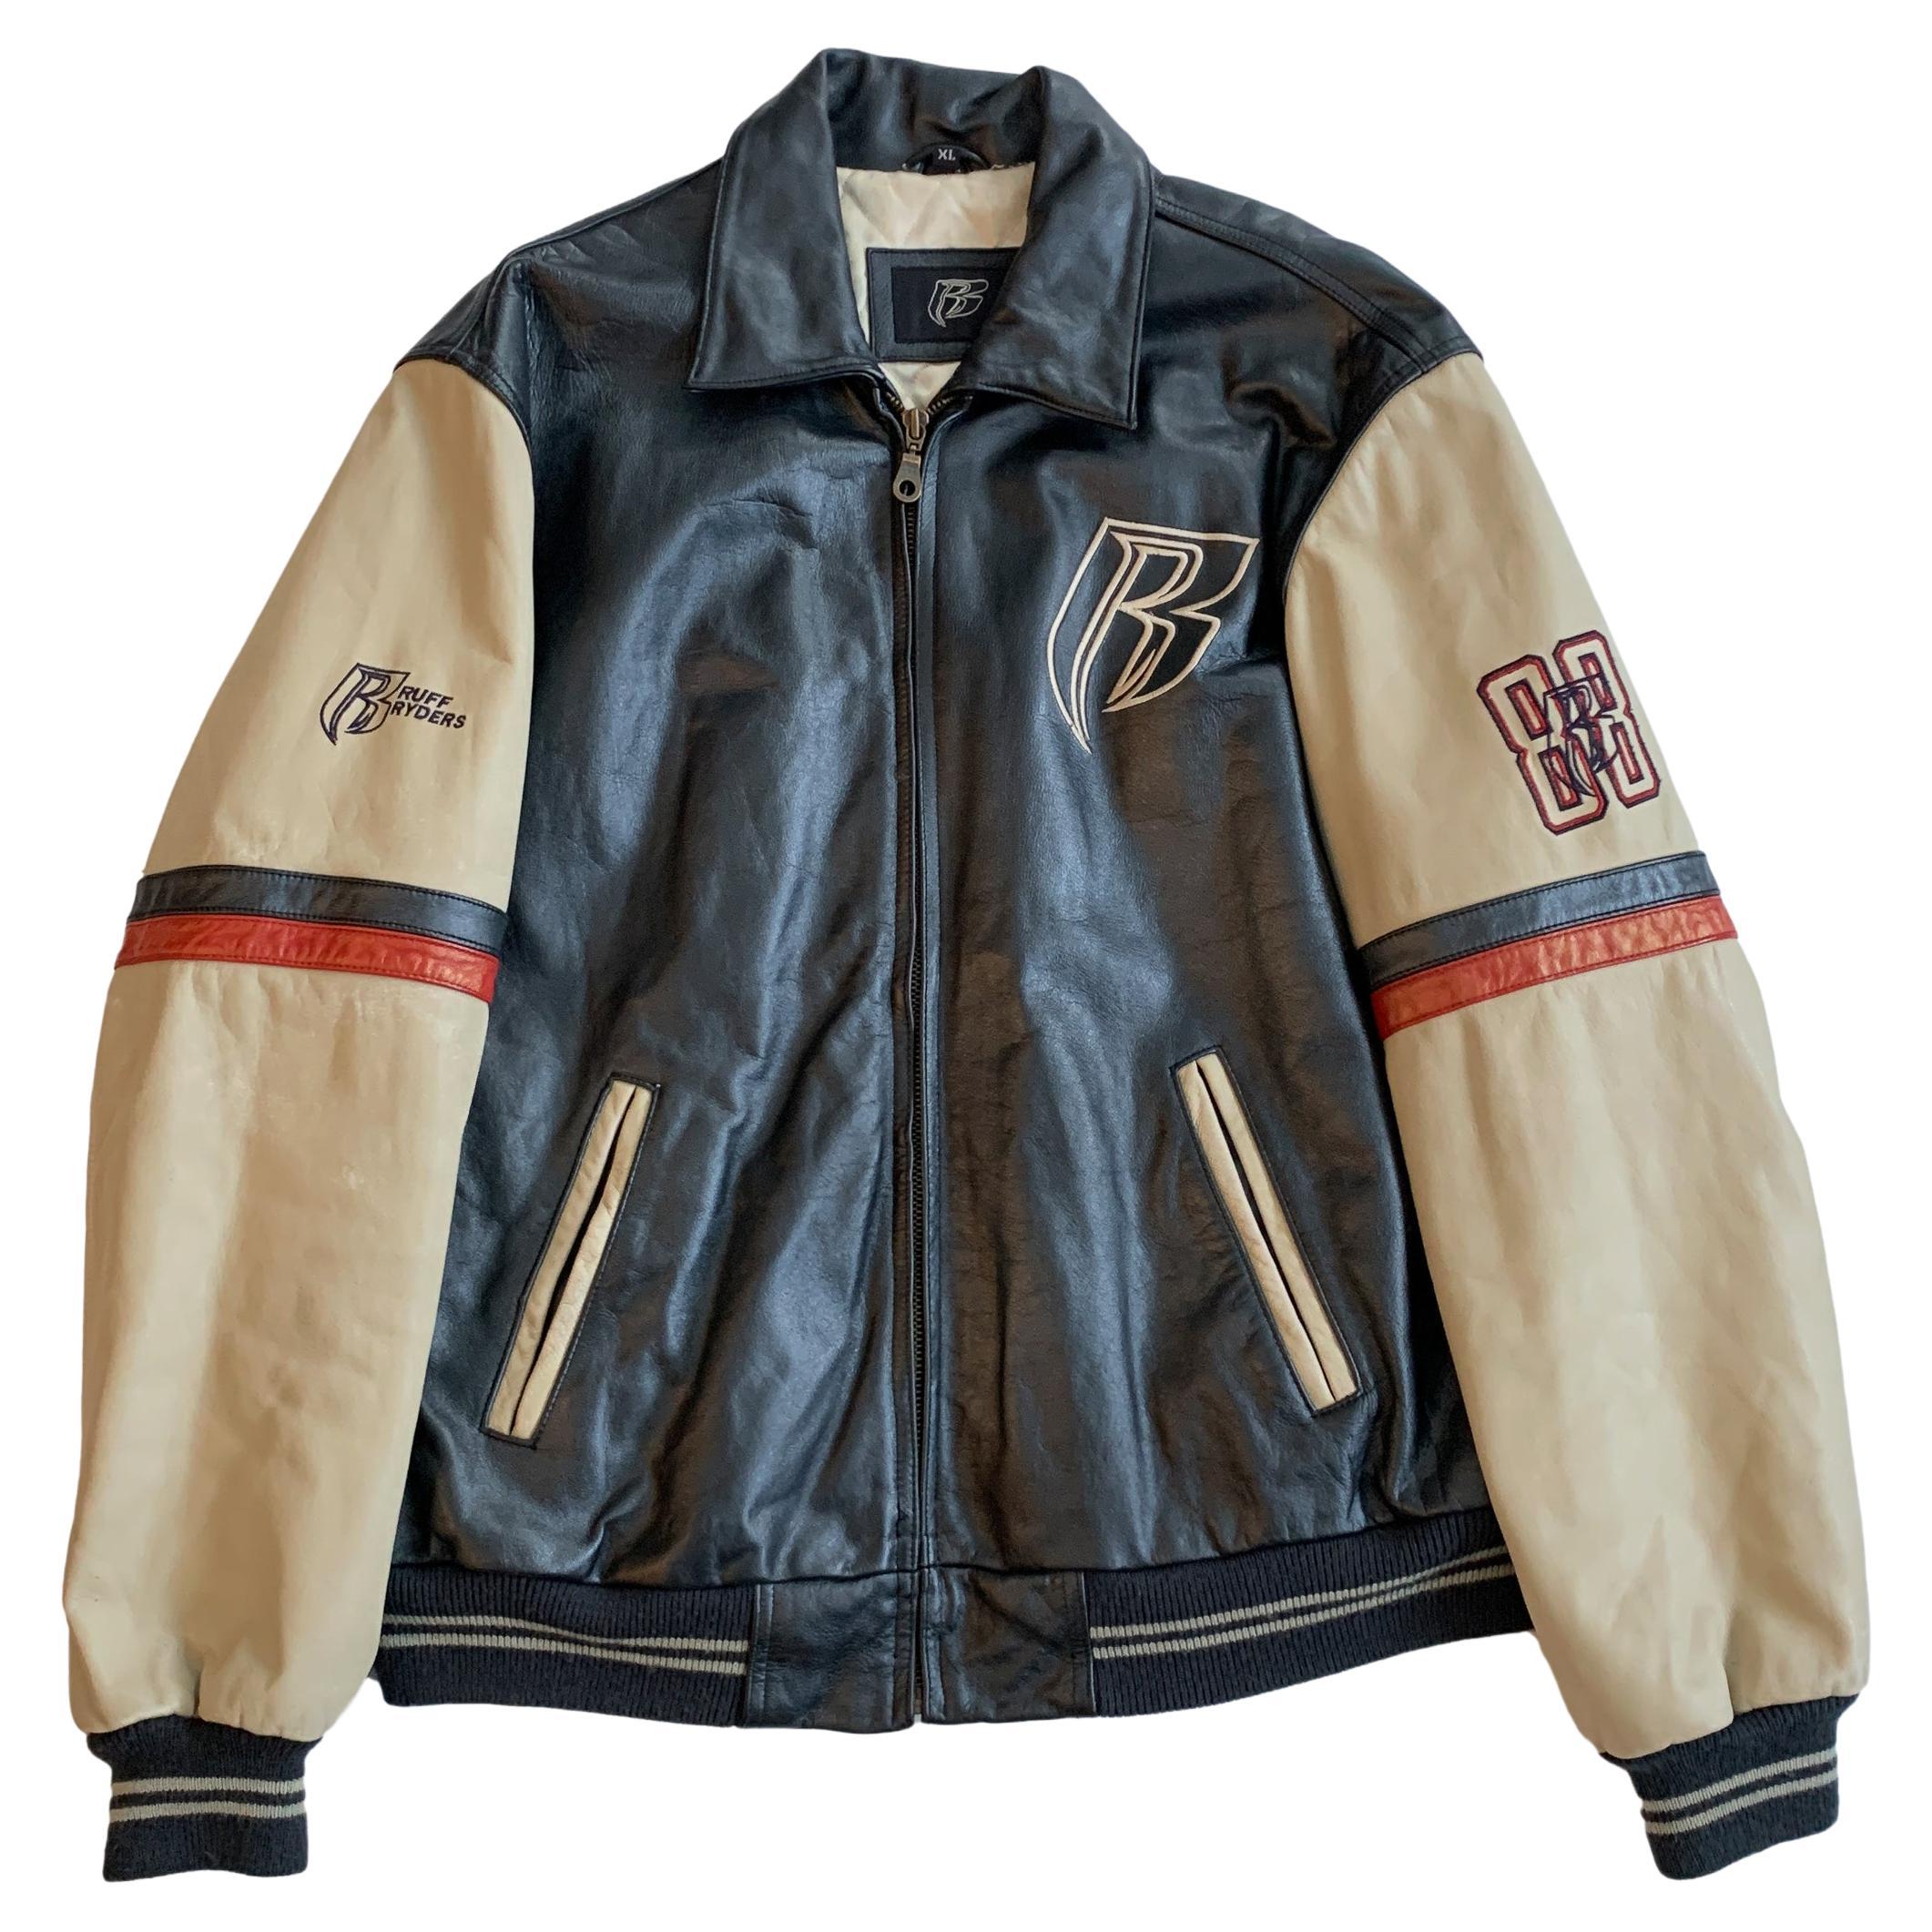 Ruff Ryders Unisex Leather Bomber Jacket For Sale